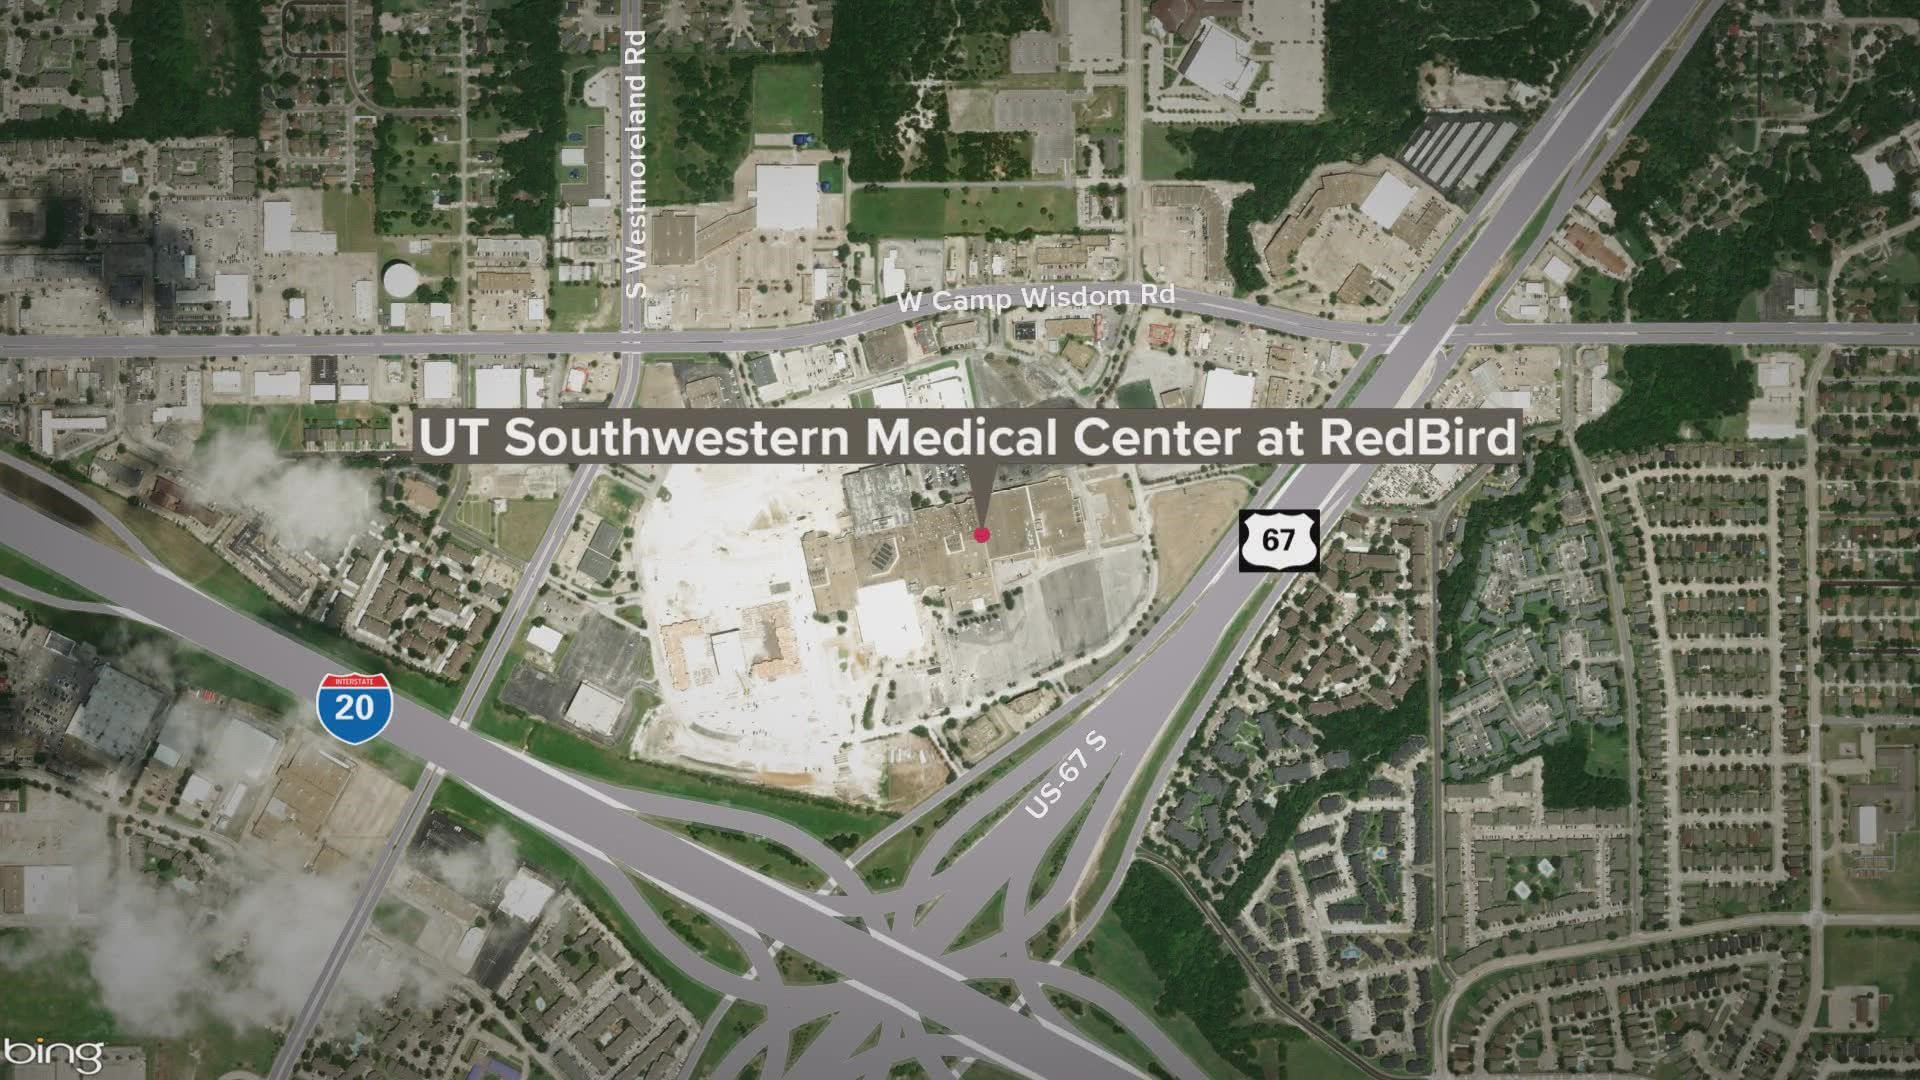 The first academic medical center to specifically serve southern Dallas will open its doors for the first time this weekend.